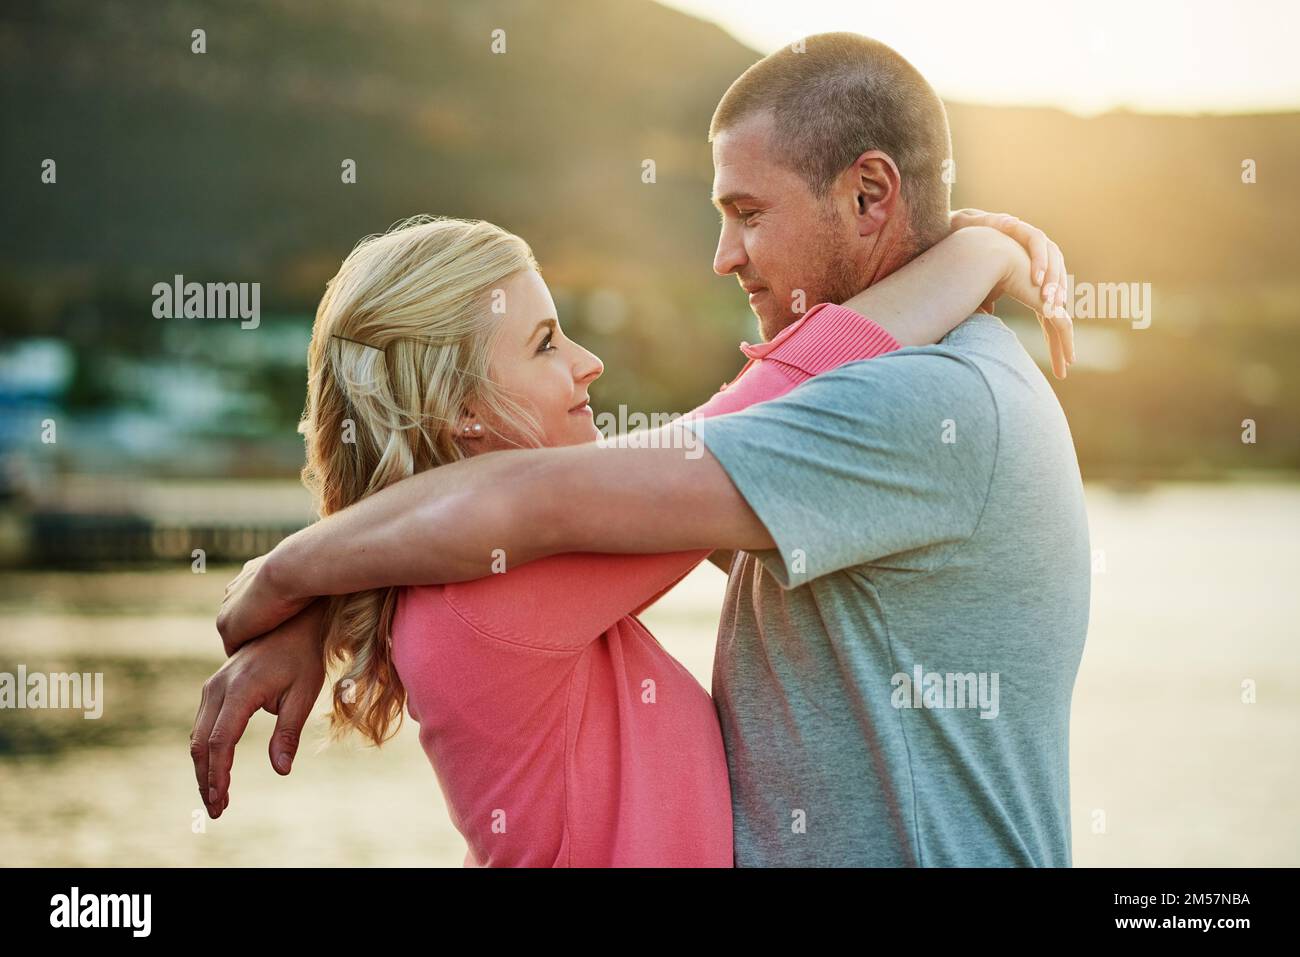 Making time for us. an affectionate couple bonding at the beach. Stock Photo